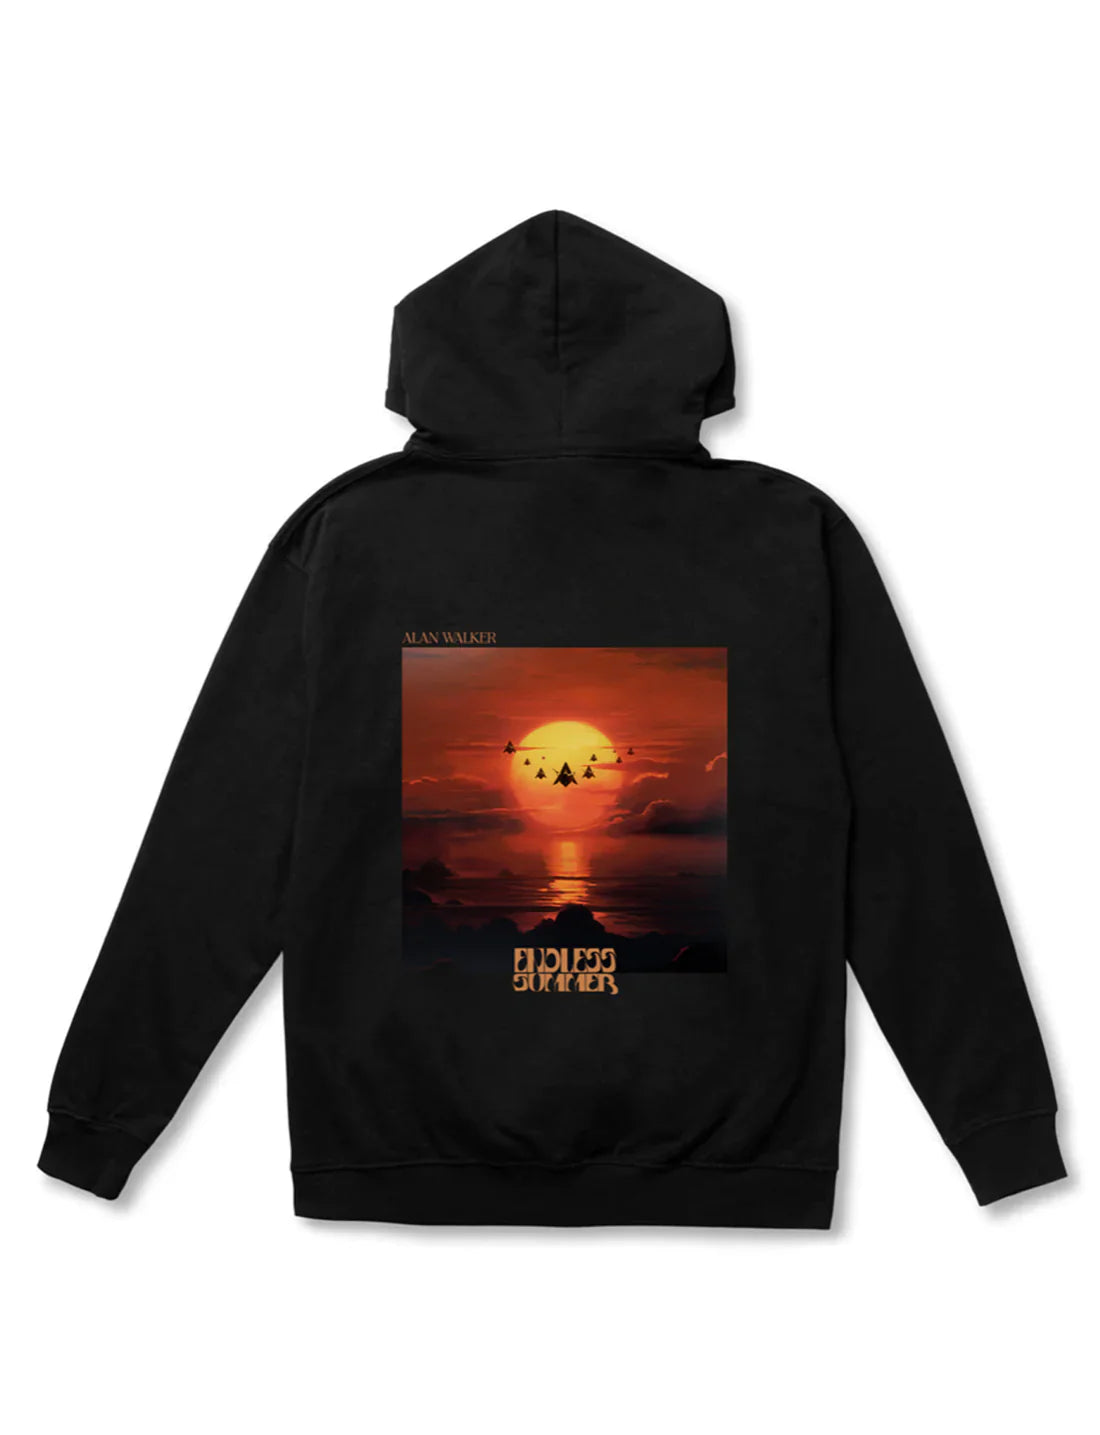 Back view of Alan Walker's Endless Summer Hoodie in black, featuring a vibrant sunset graphic with silhouette of palm trees and 'Endless Summer' text below, displayed on a white background.